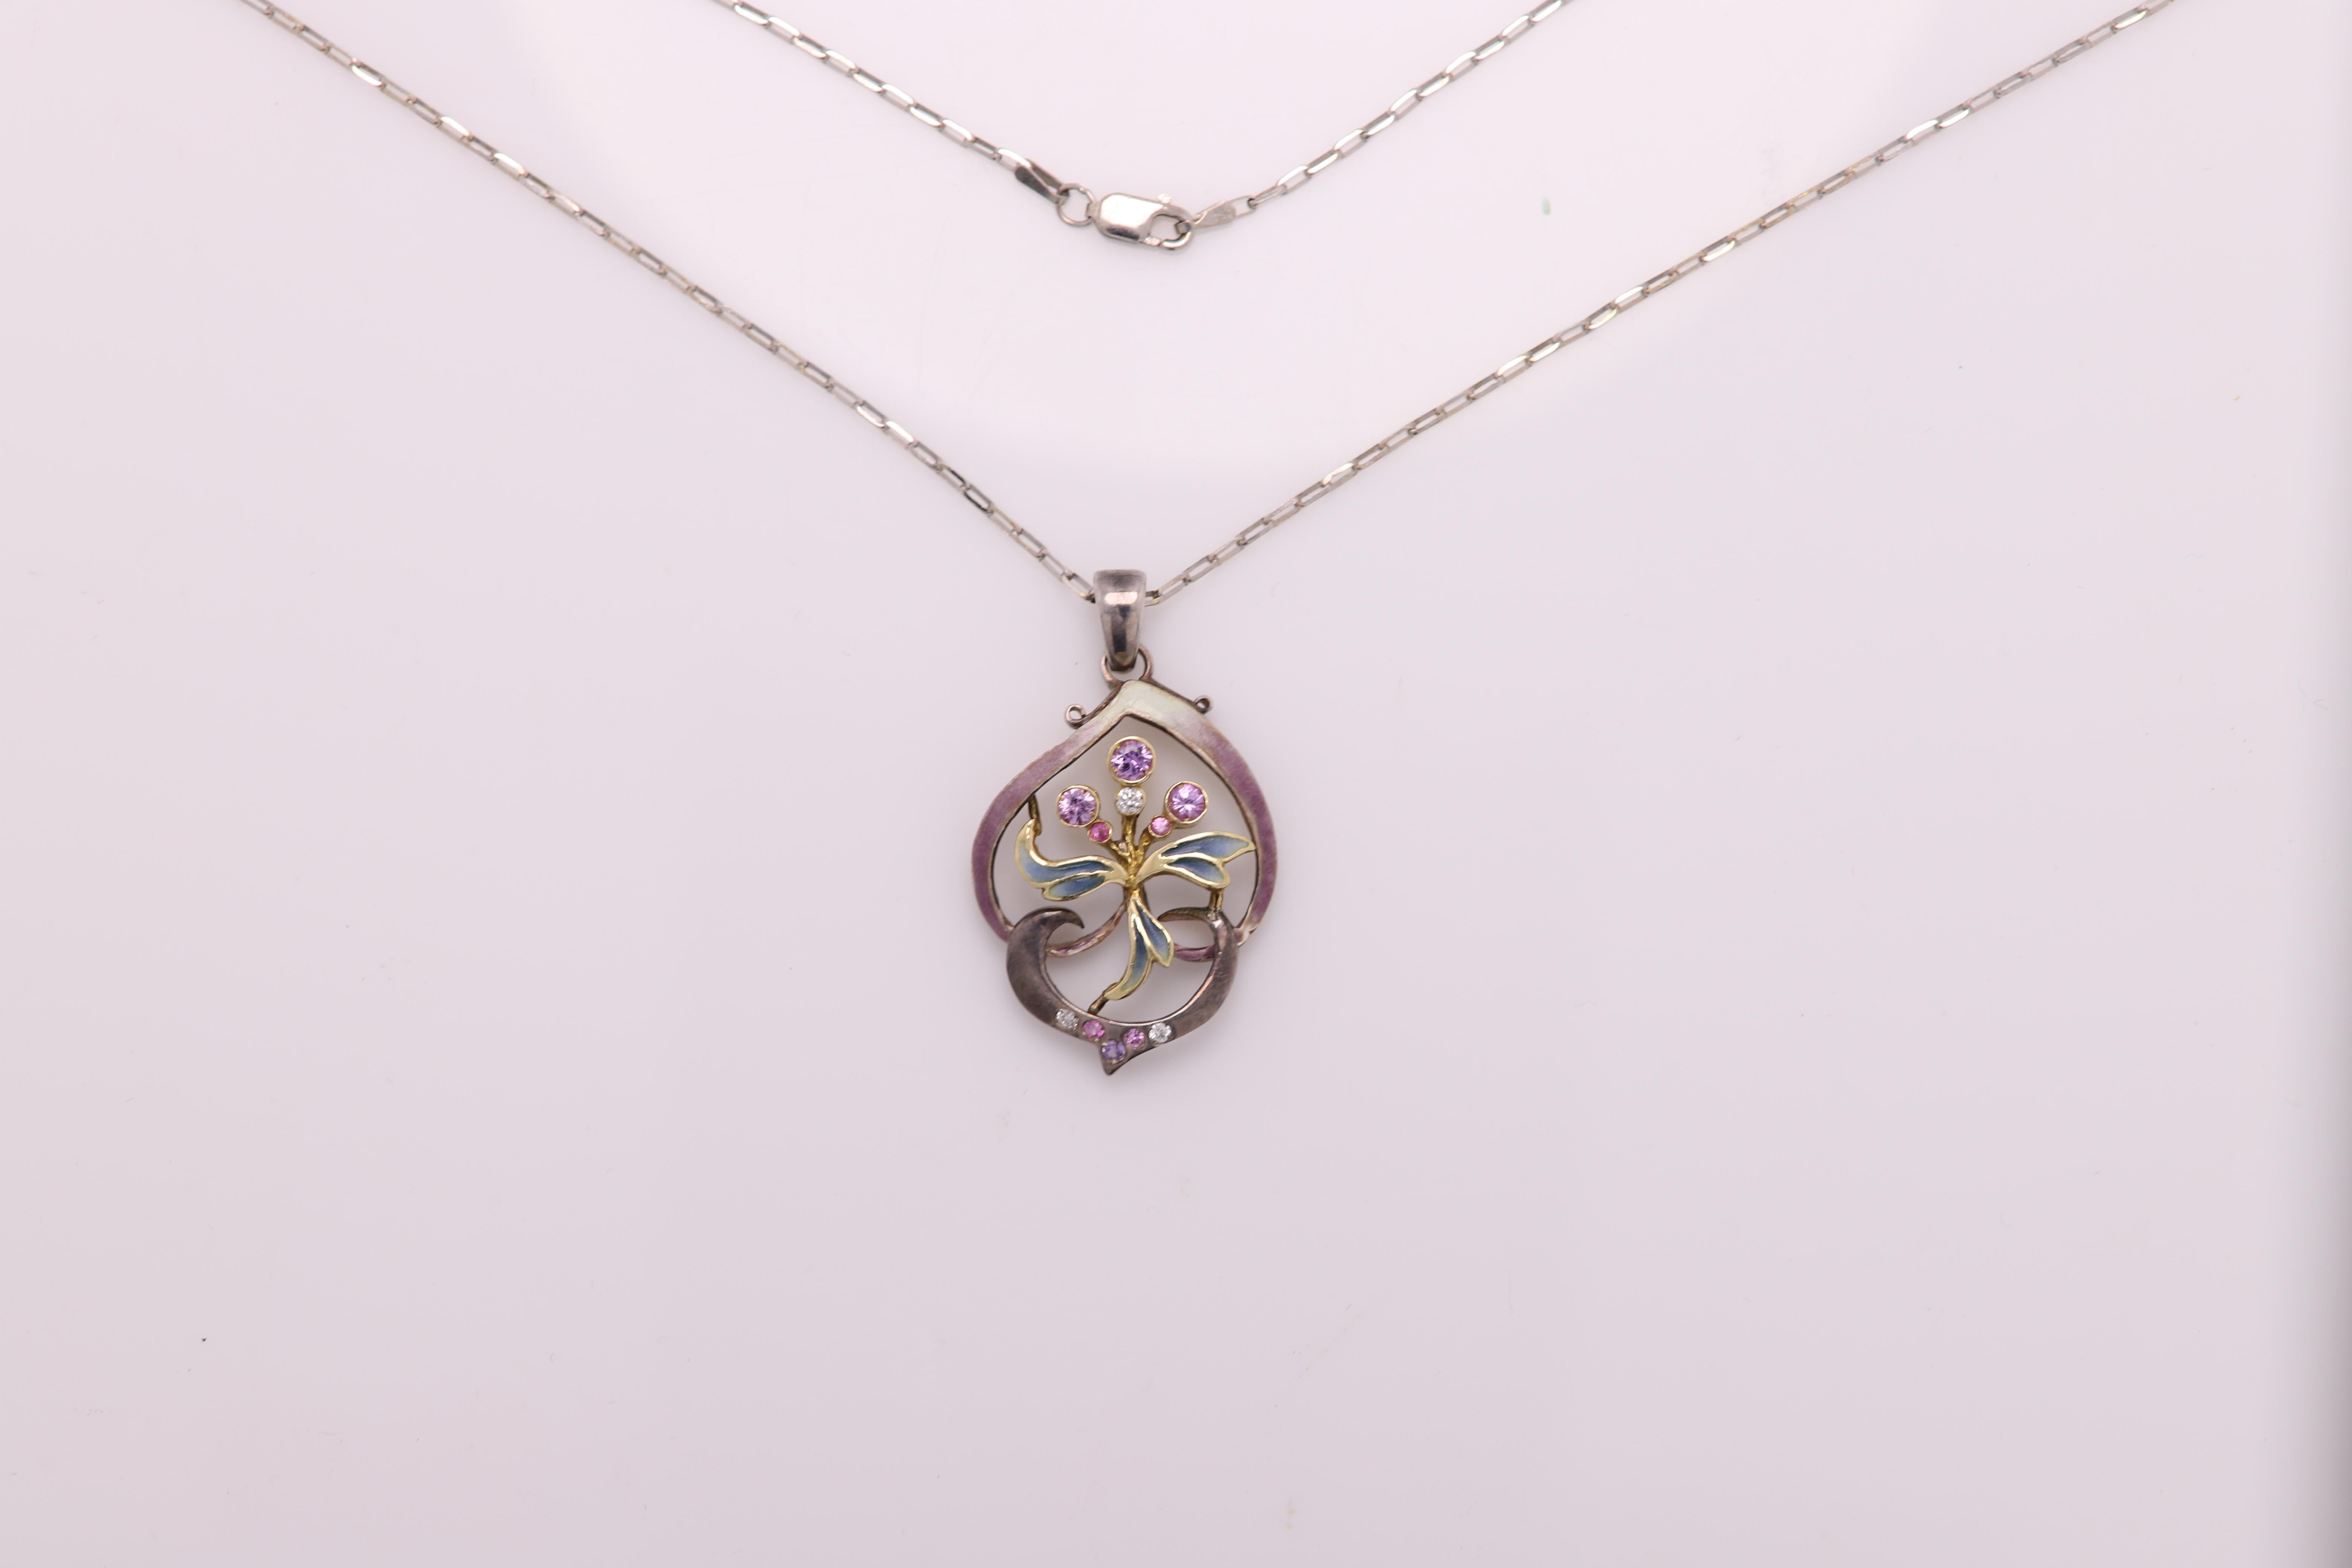 Beautiful Vintage Hand made in Spain Enamel pendant
Oxidized Sterling Silver and 18 yellow Gold 
approx size 1'  inch (30mm)
pink and white natural gemstones (tourmaline and diamonds) 
Weight approx 7 grams
Chain length 17' inch (18k white gold)